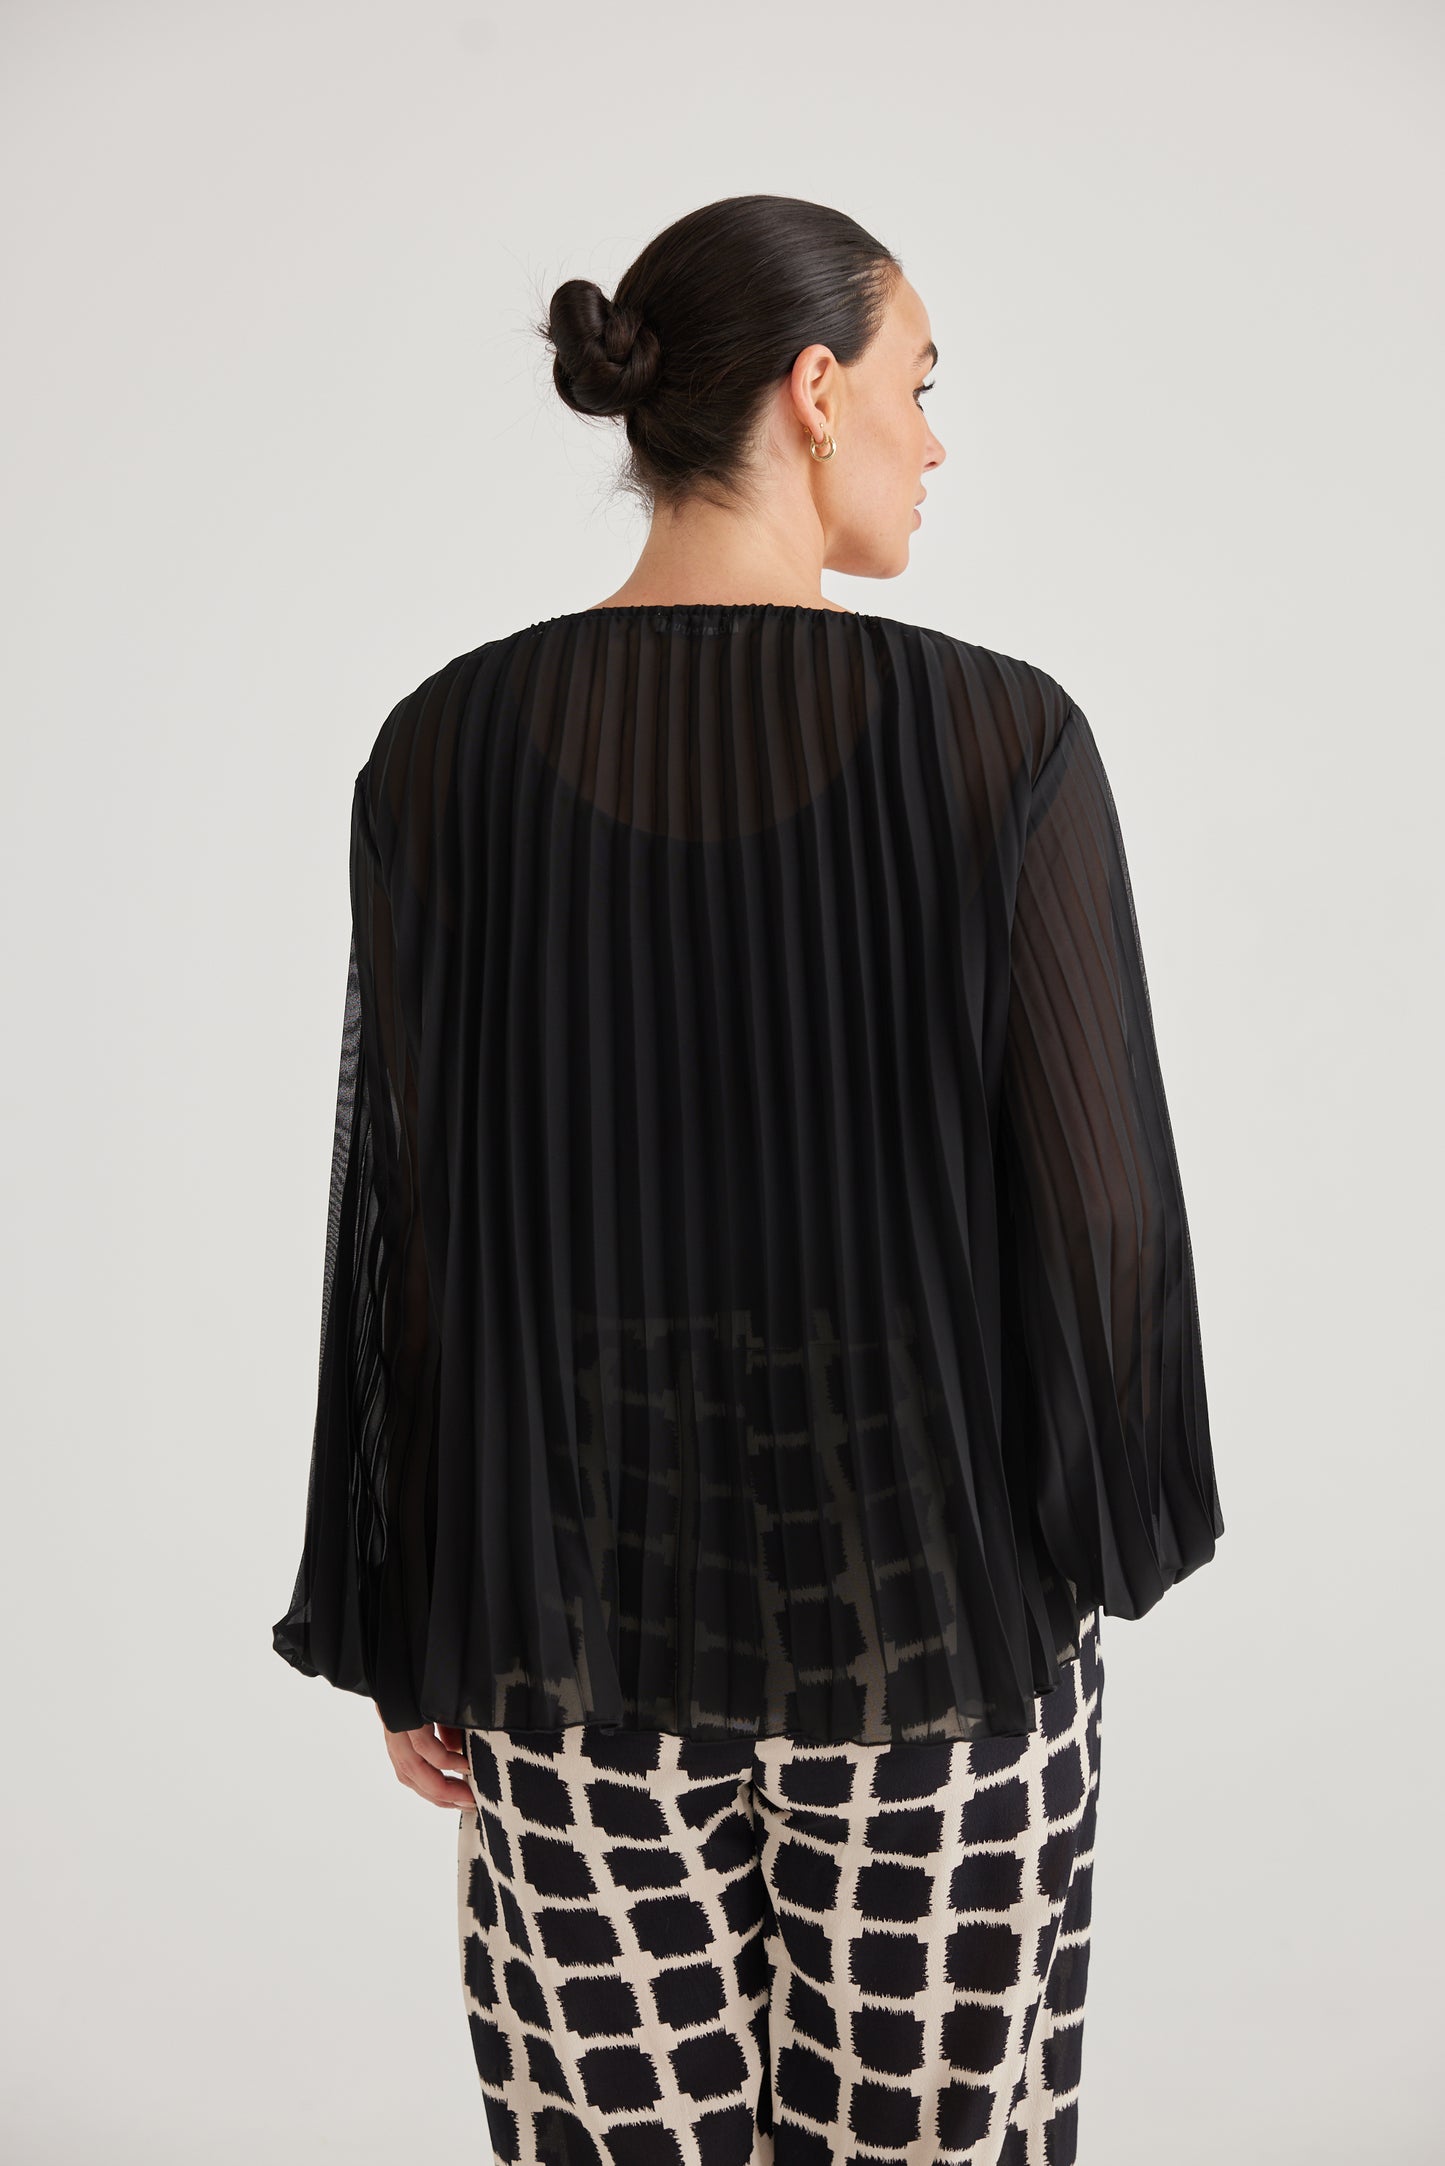 Georgie Long Sleeve Top - 40% OFF AT CHECKOUT